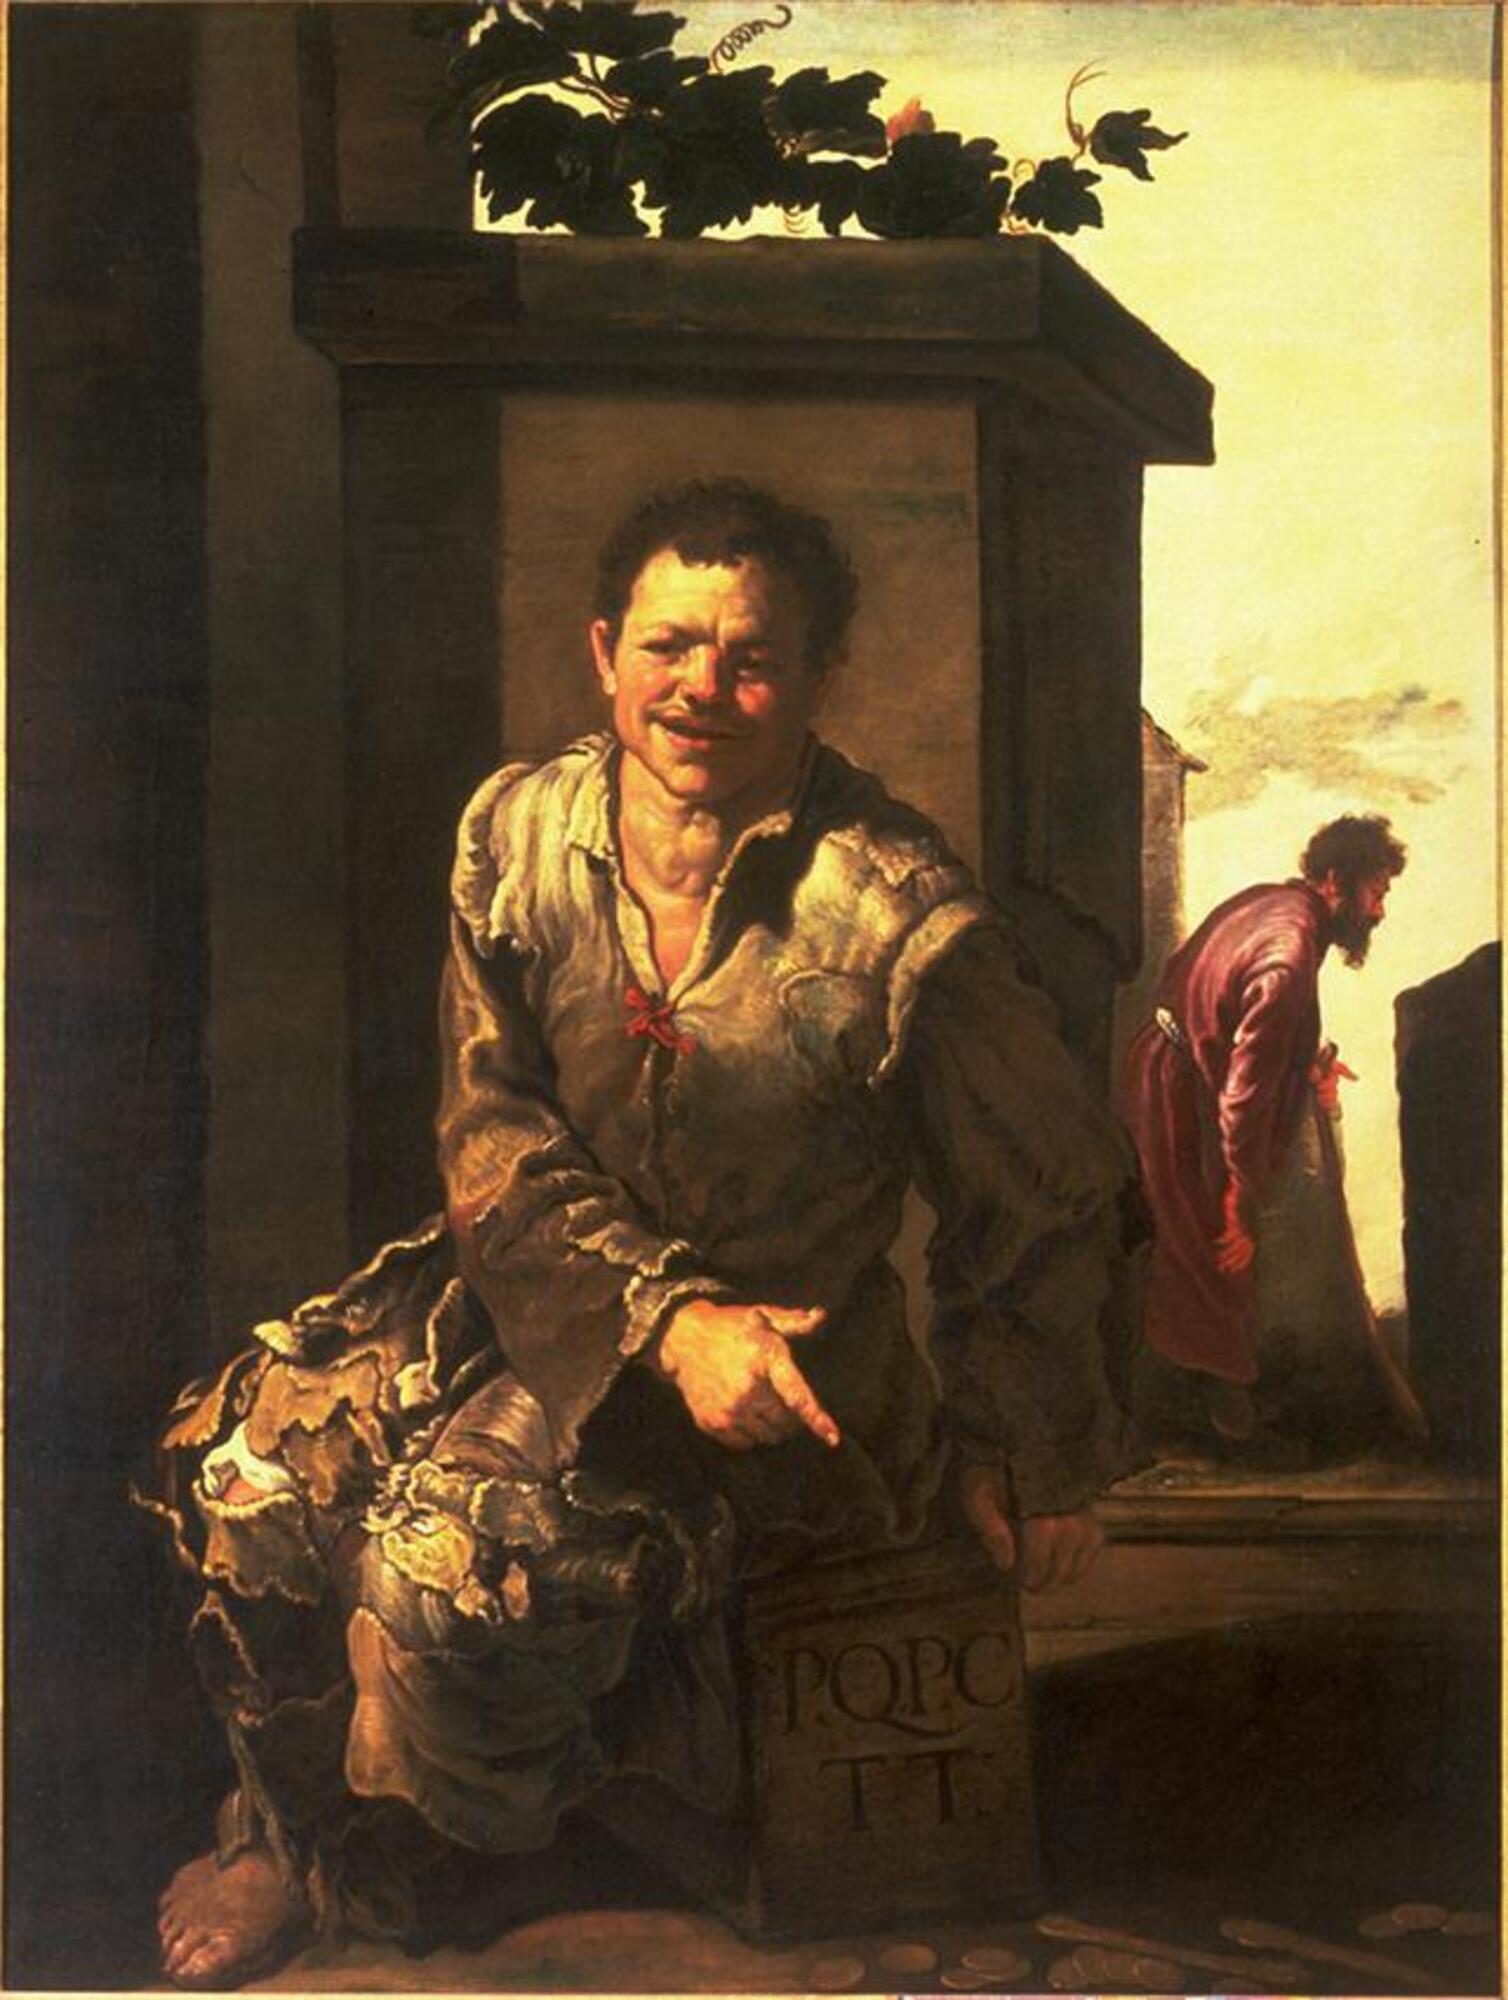 This painting shows a man seated on a bench, facing the viewer. He leans forward slightly and his right hand reaches across his body to point toward a group of coins on the ground. He is dressed in tattered clothing and his feet are bare. The bench where he is seated is inscribed with the letters: P. Q. P. C. /T. T. This is an outdoor scene with open sky in the background and some vegetation on a ledge above him, but there are no details to indicate the exact location. Another man is shown in the background at the right, walking hunched over and using a staff. There is a strong contrast between dark and light in this painting. The figure of the walking man and the dark shapes of buildings are outlined against the light backdrop of the sky. A strong warm light, from the left side of the painting, highlights the knees, hand and upper body of the seated man.